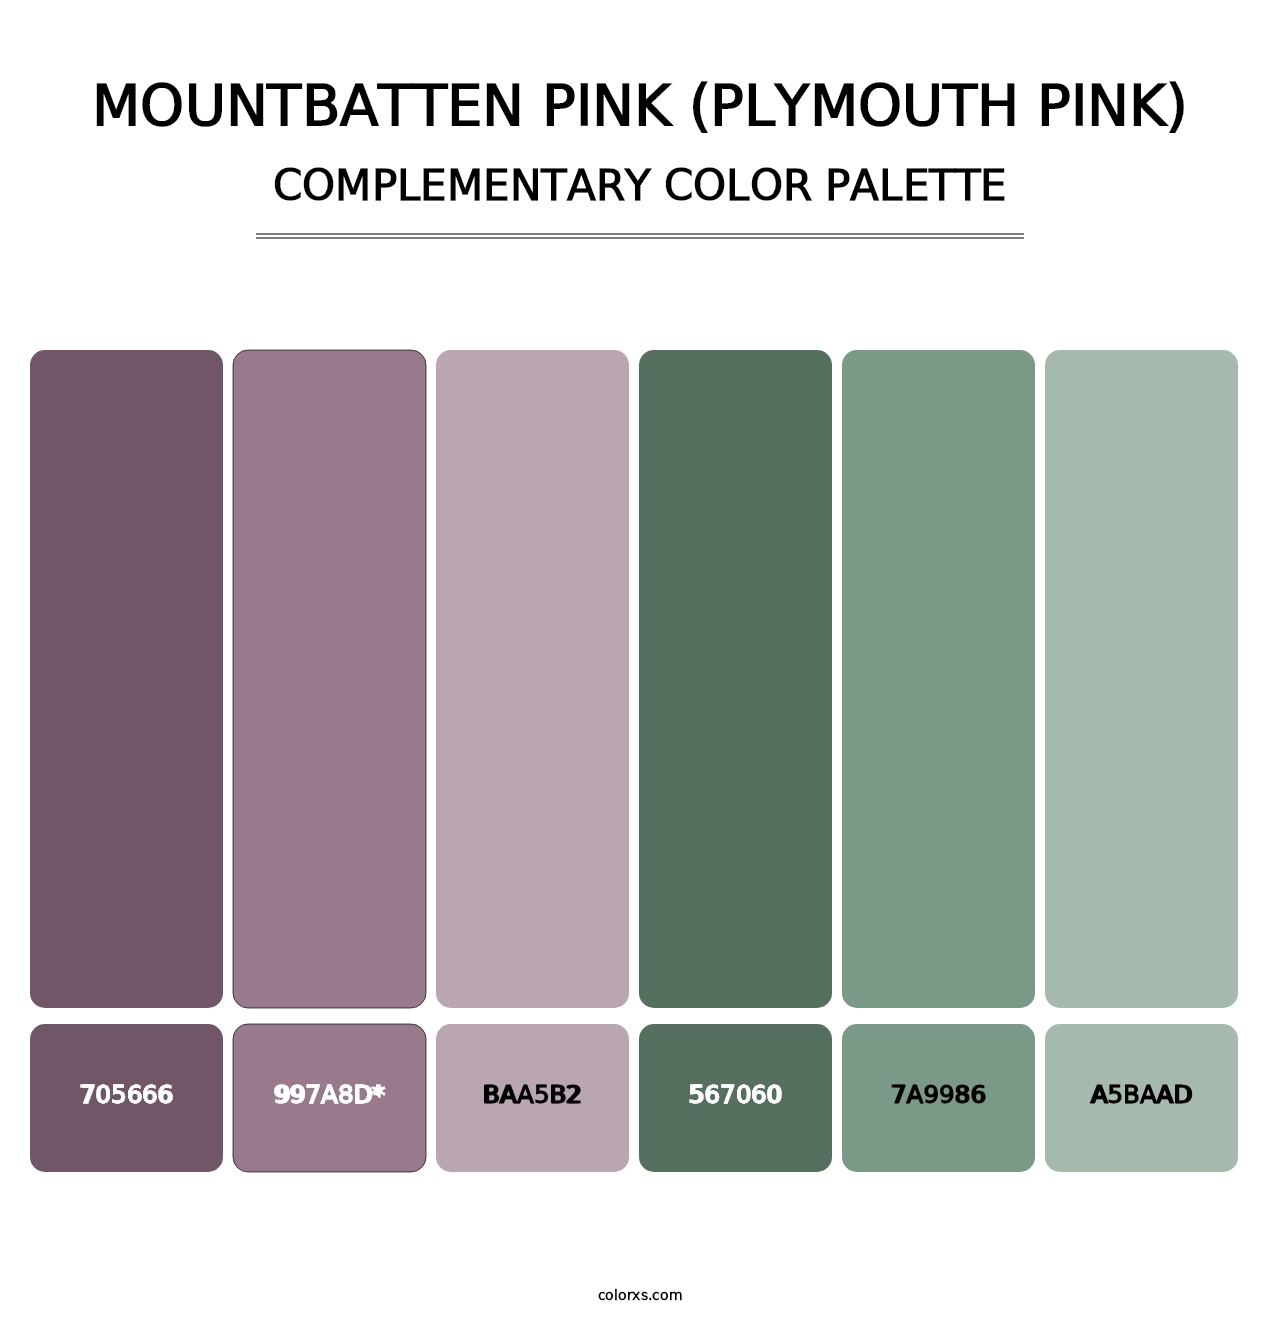 Mountbatten Pink (Plymouth Pink) - Complementary Color Palette